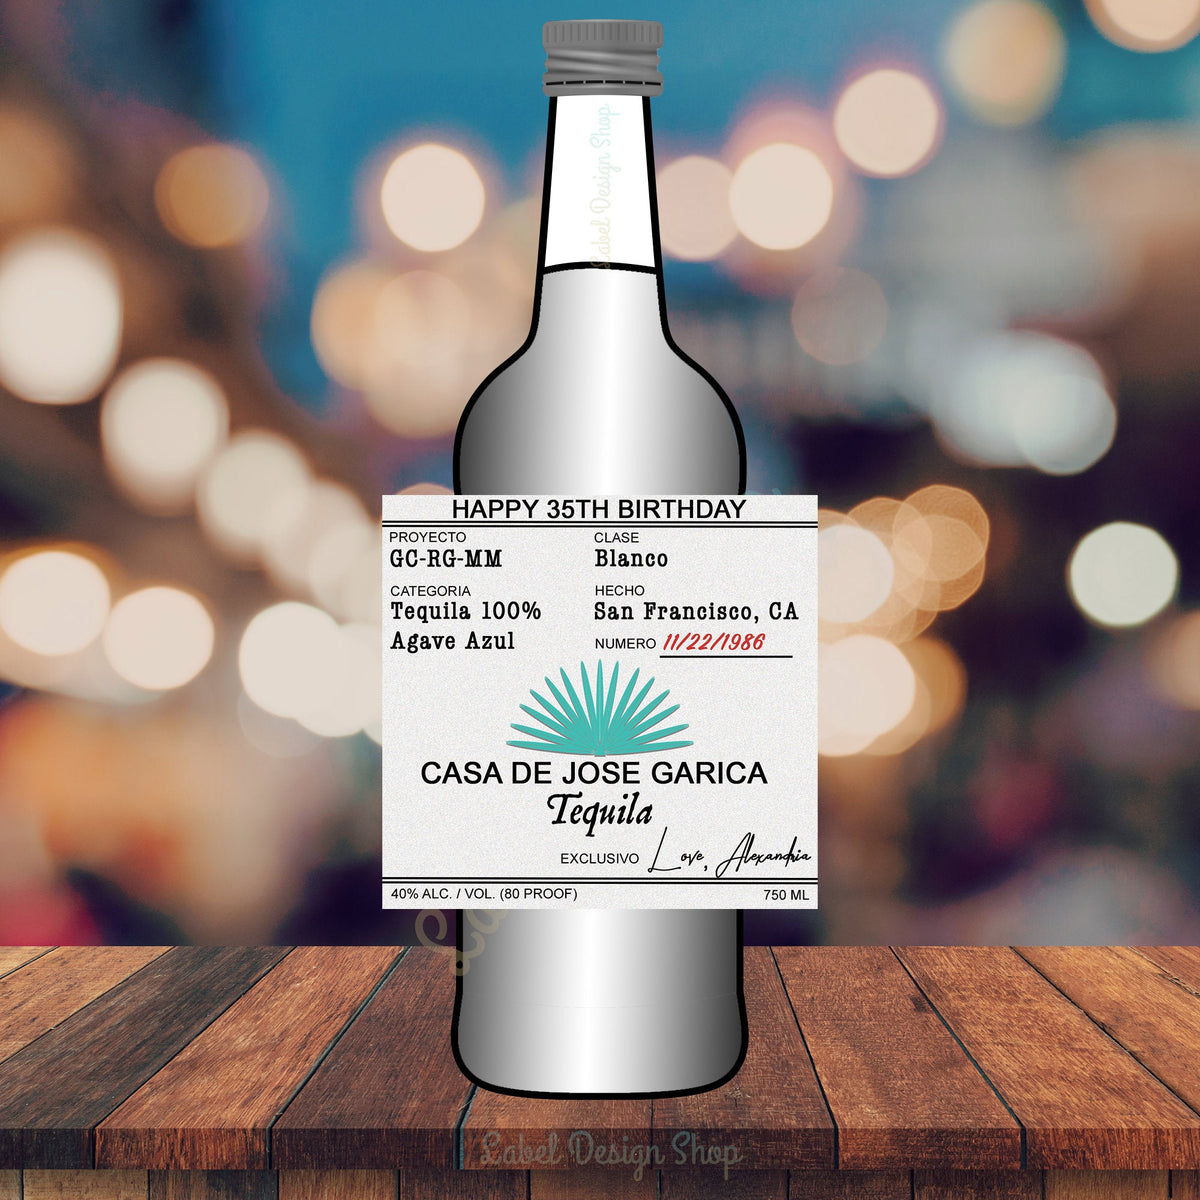 Casamigos Label Template - Printable Word Searches